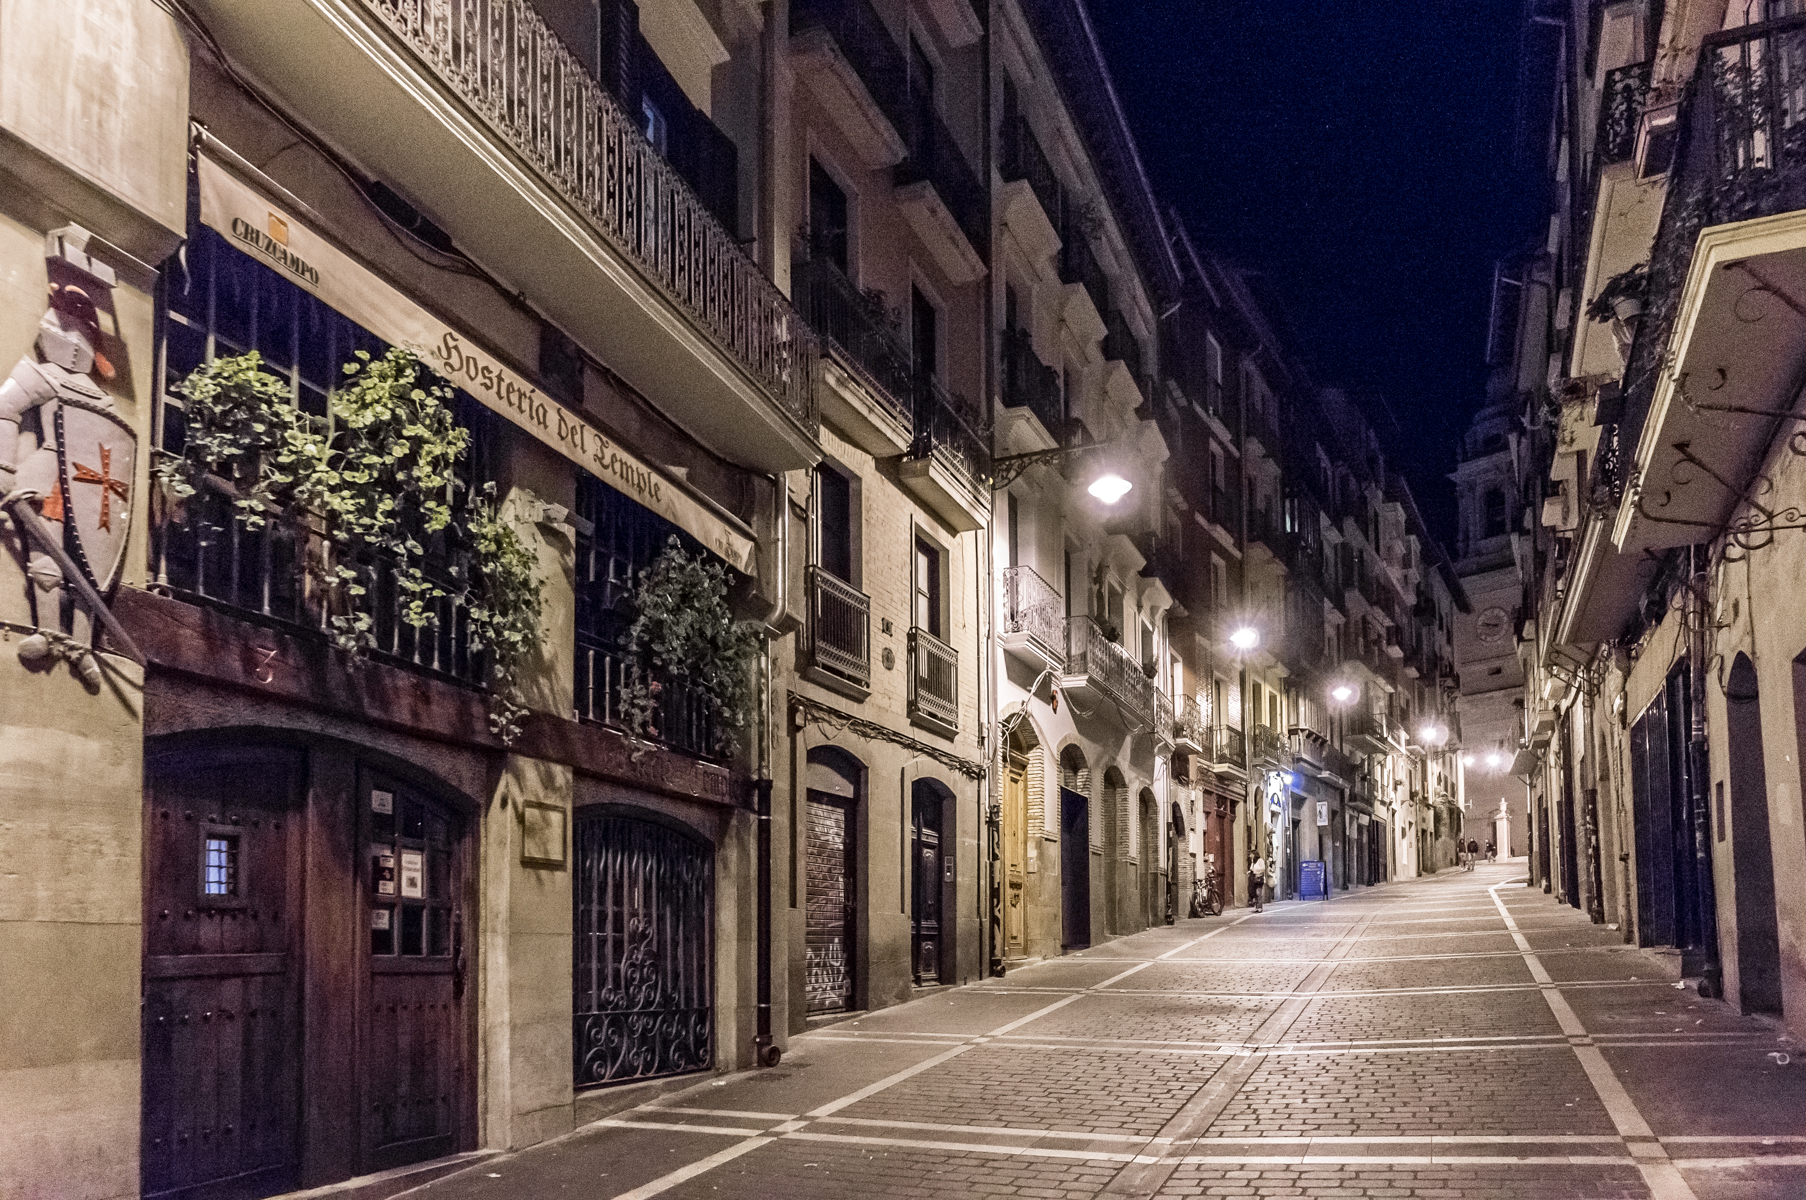 Nearly deserted street at night, Pamplona, Spain | Photo by Mike Hudak.